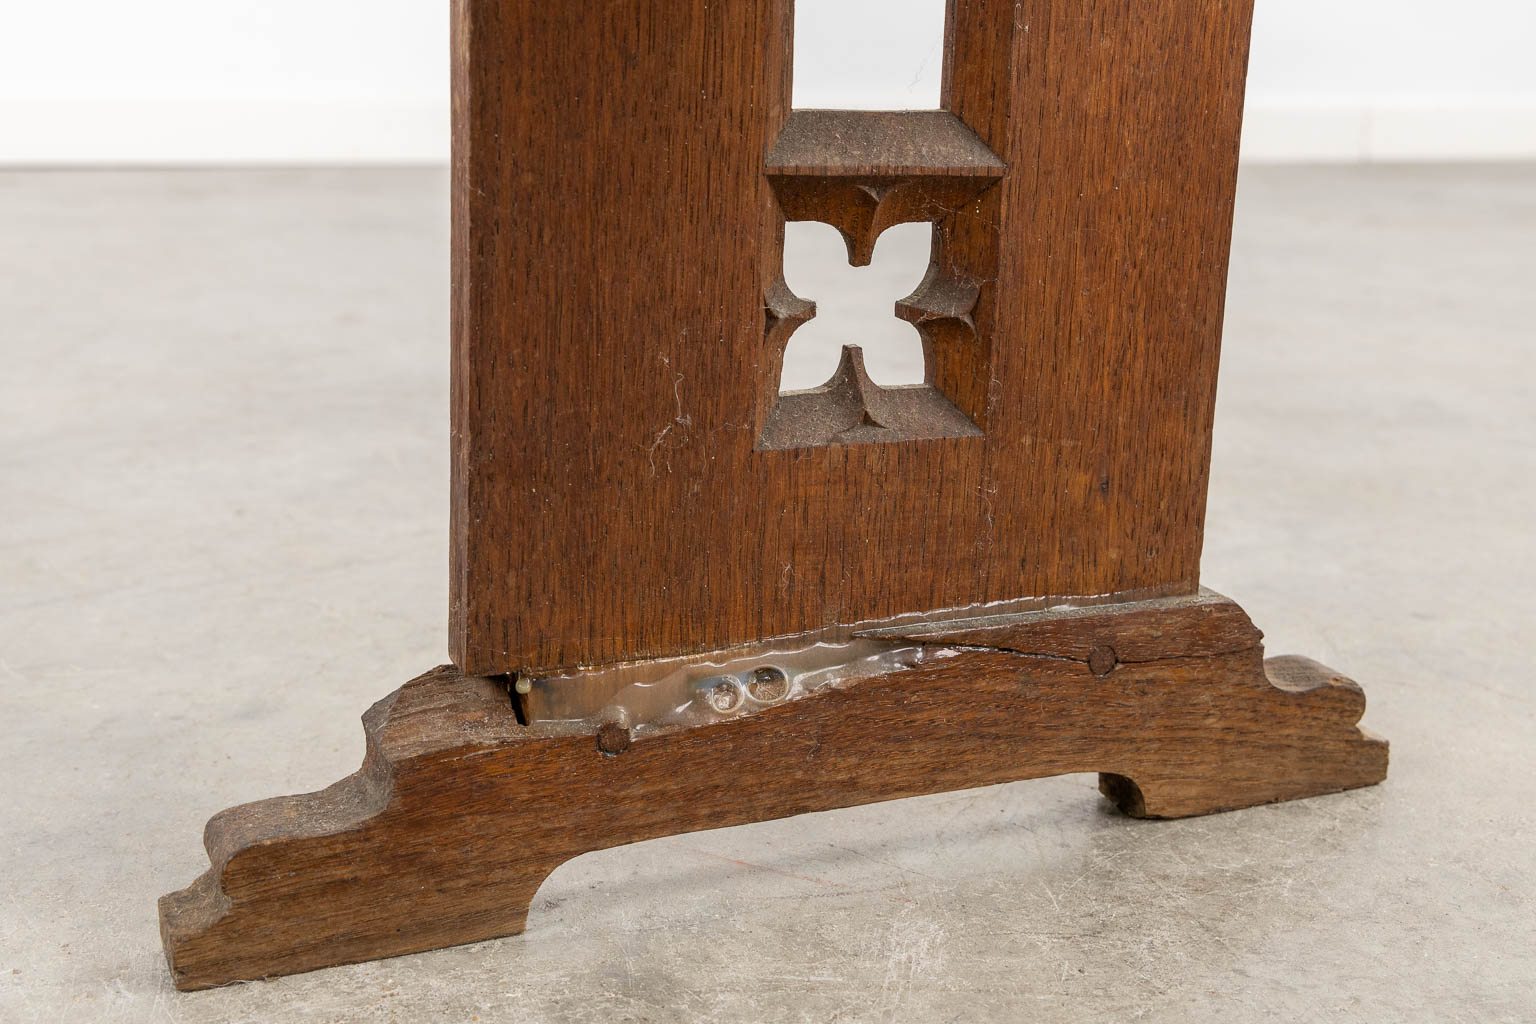 A small manger, sculptured wood, Gothic Revival. (L:29 x W:62 x H:81 cm) - Image 10 of 10